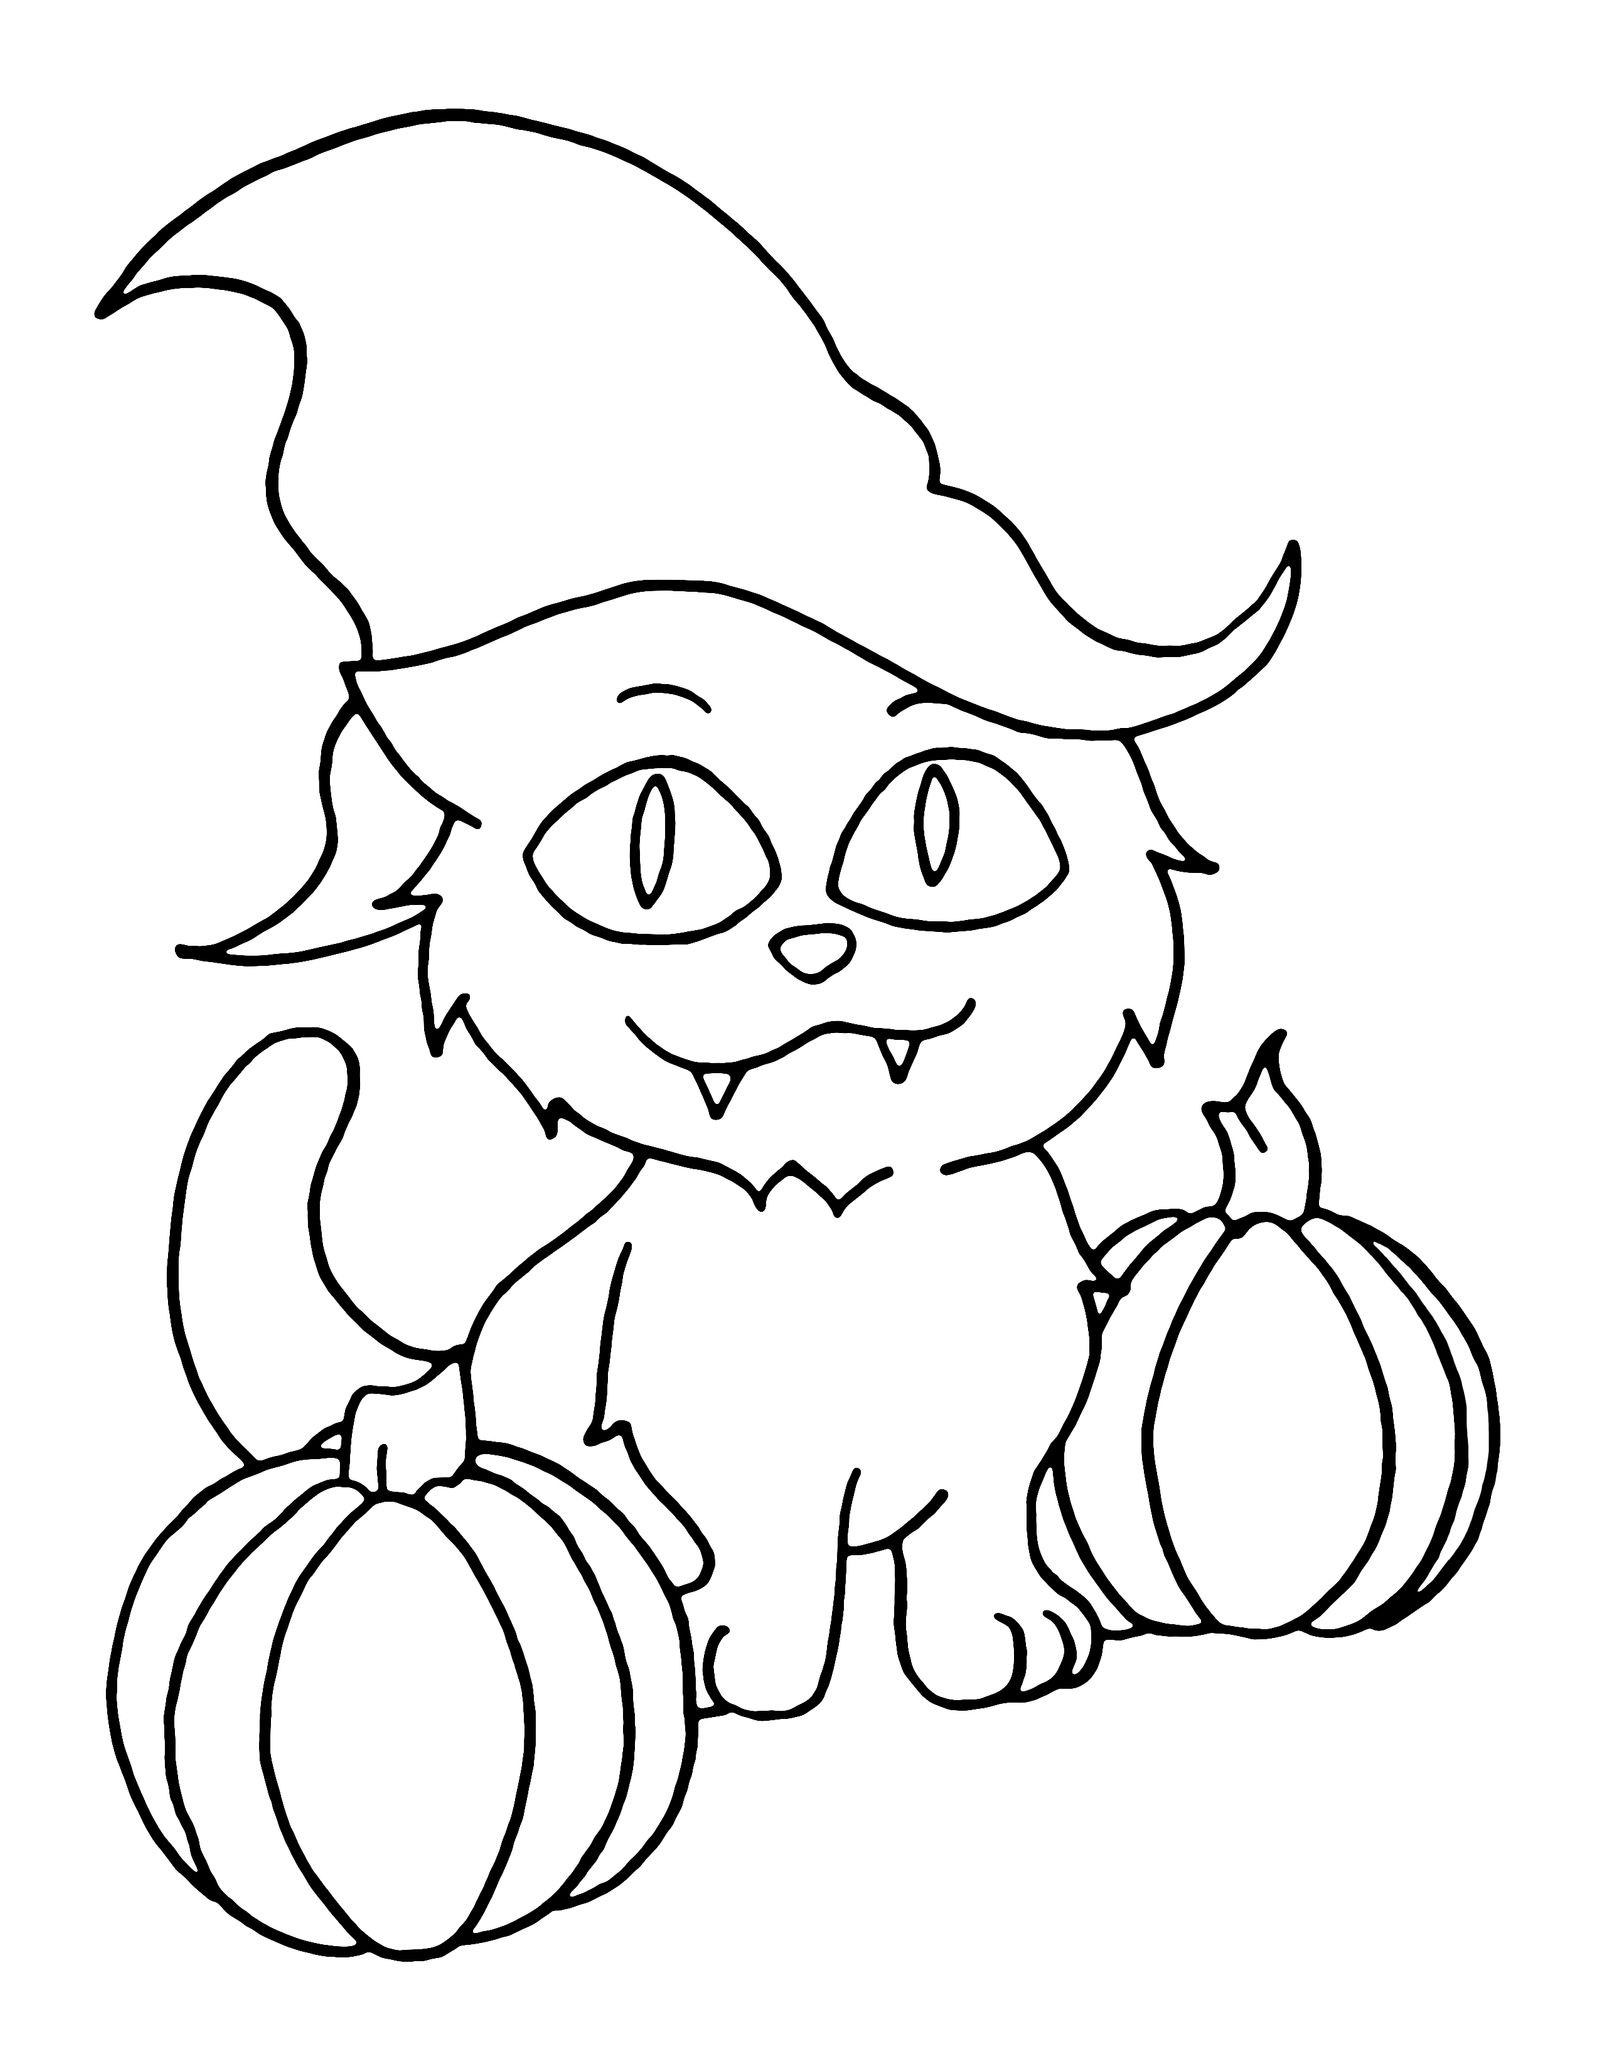 Witch cat coloring page by cetivarose on